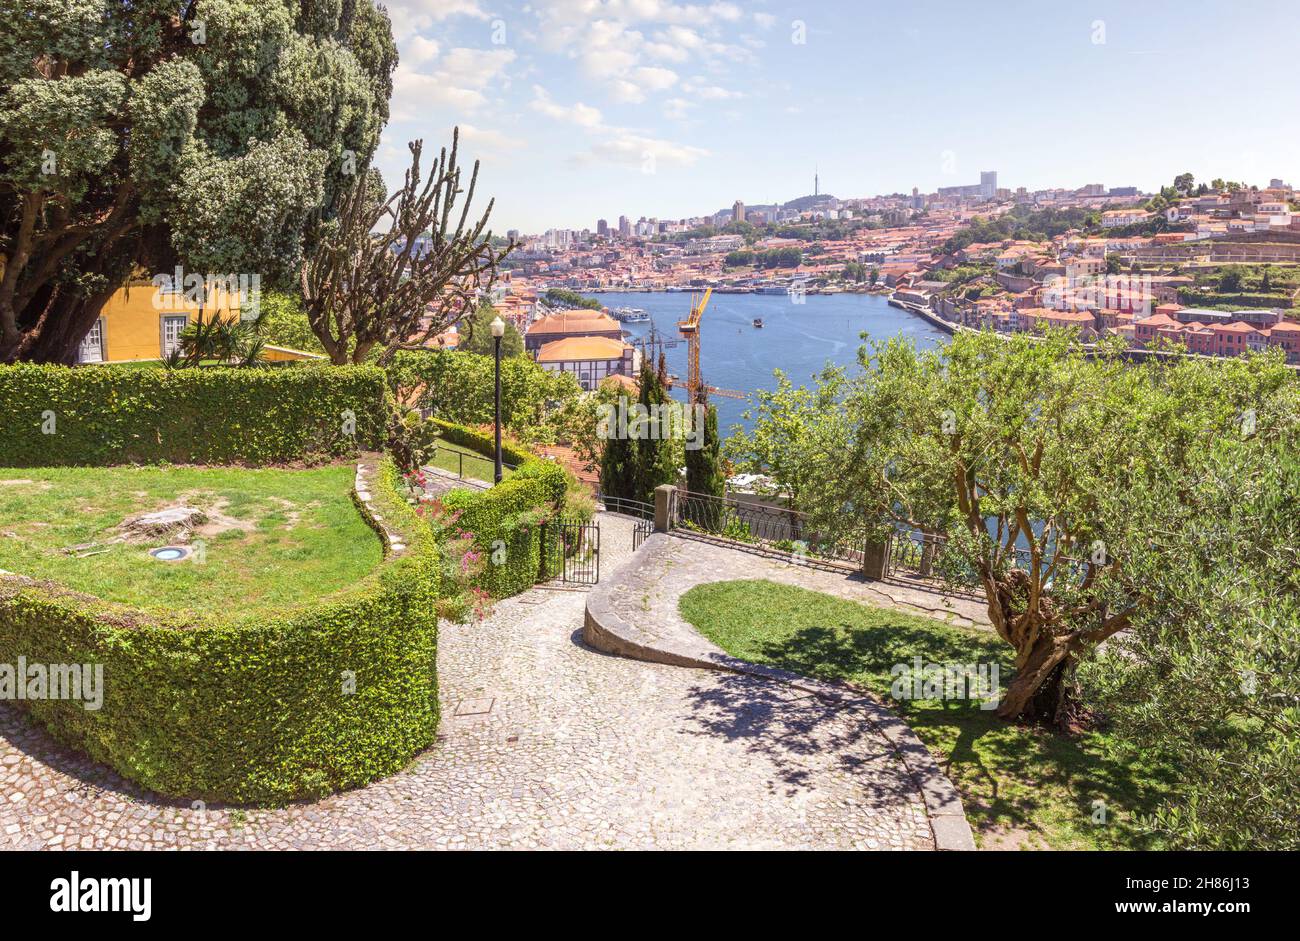 View of the Douro River and walking alleys of park from the Cristal Palace Gardens or Jardins do Palaio de Cristal. Porto, Portugal. Stock Photo